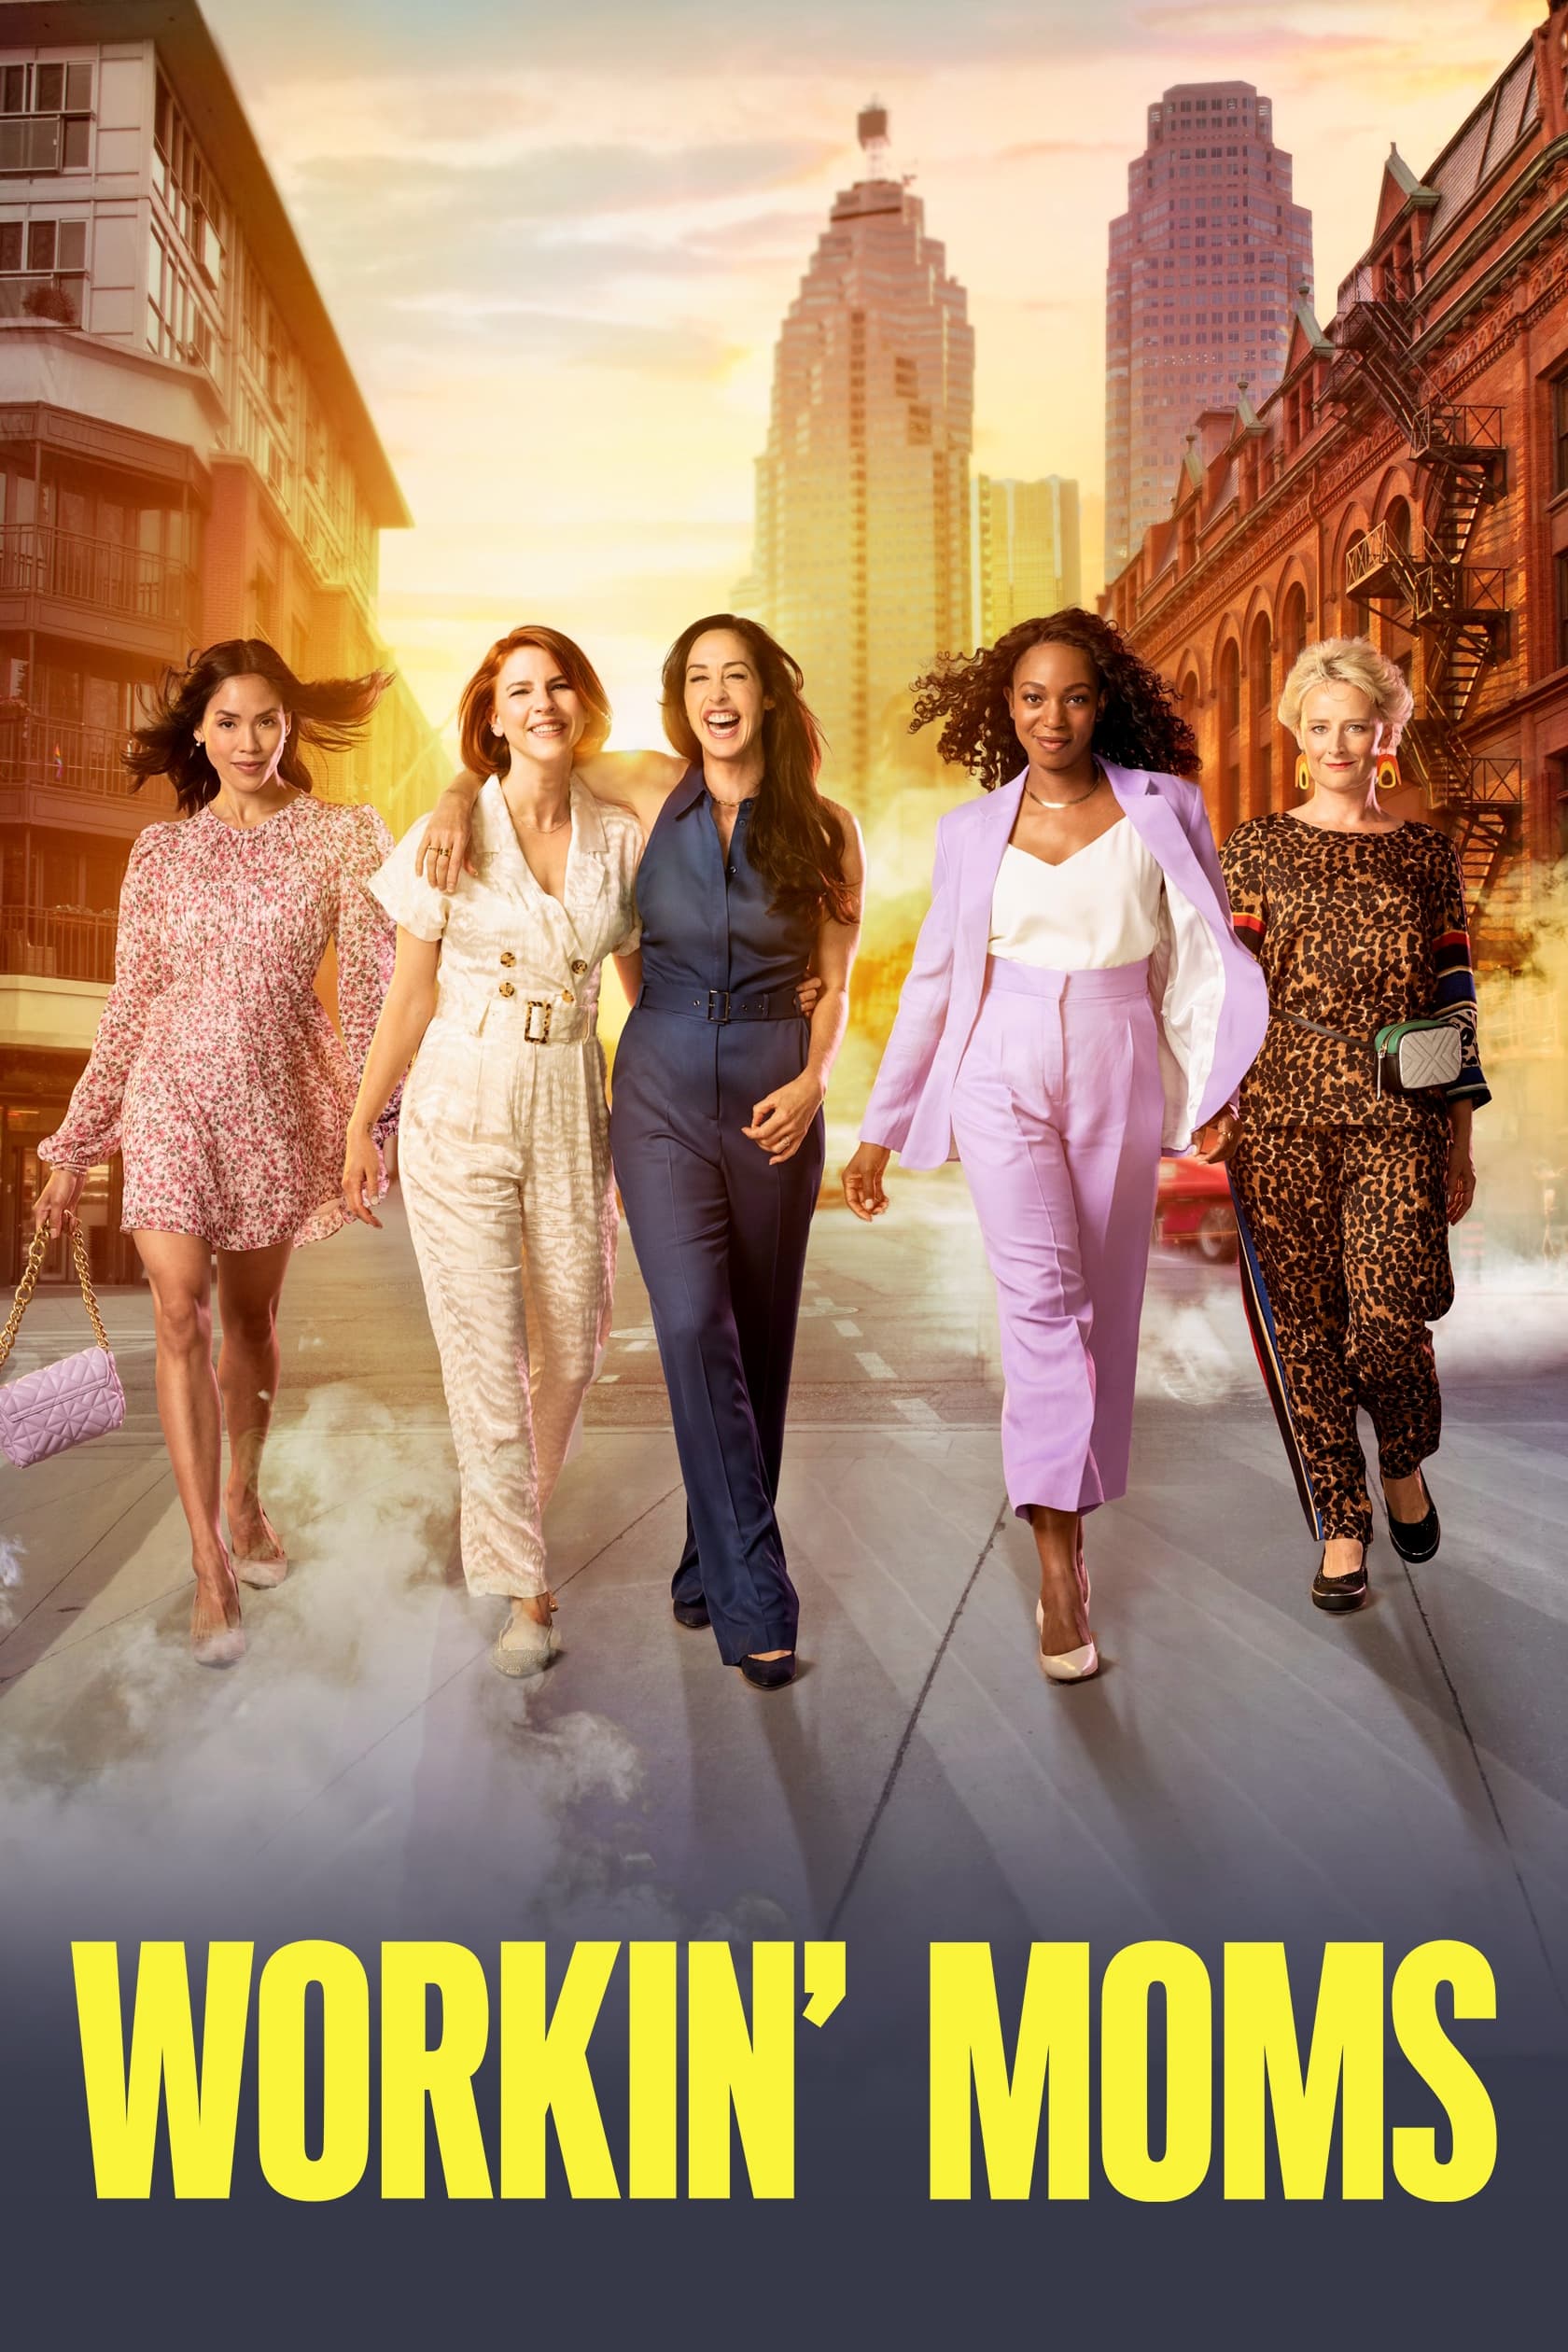 Workin' Moms TV Shows About Workplace Comedy